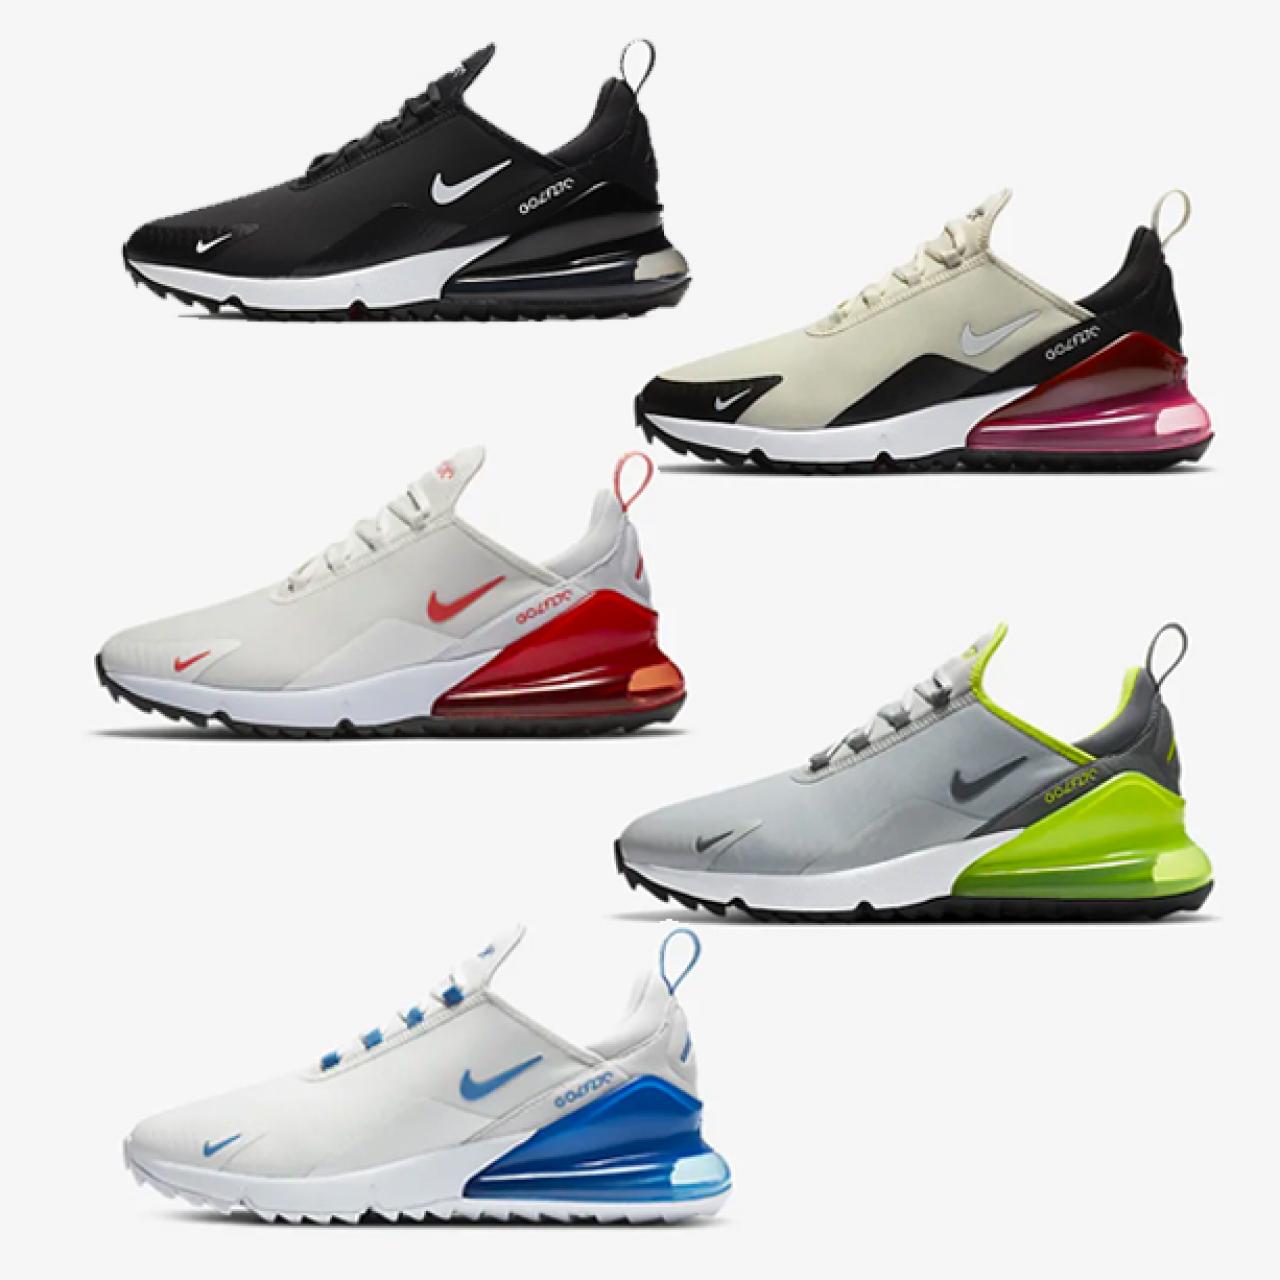 The Nike Air Max 270 Golf Shoes are finally here | Golf Equipment ...